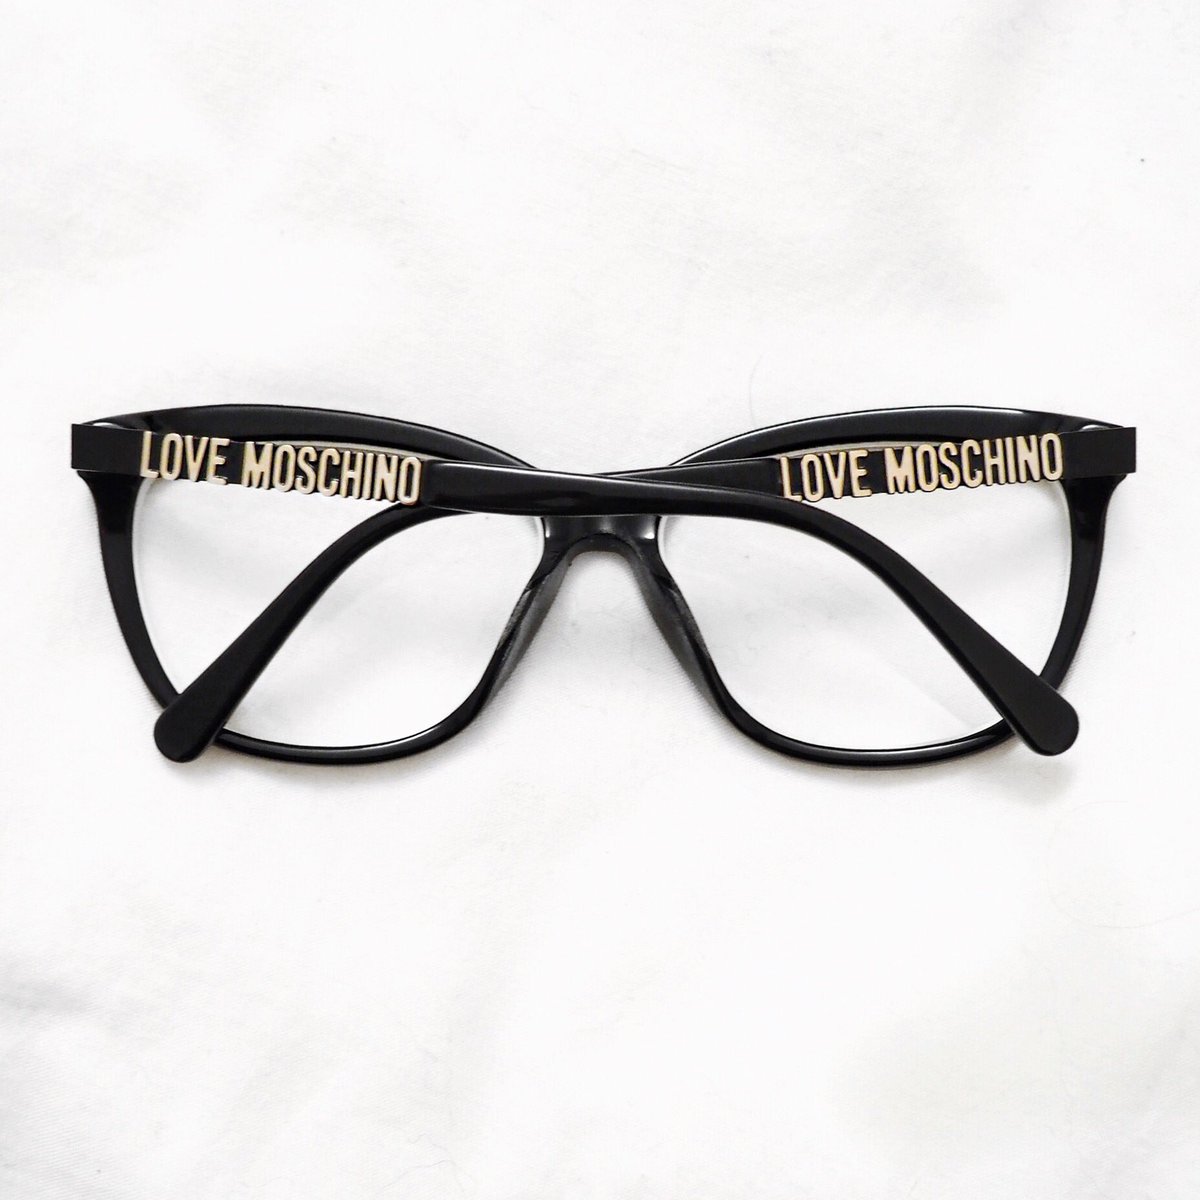 Moschino frames #fbloggers 